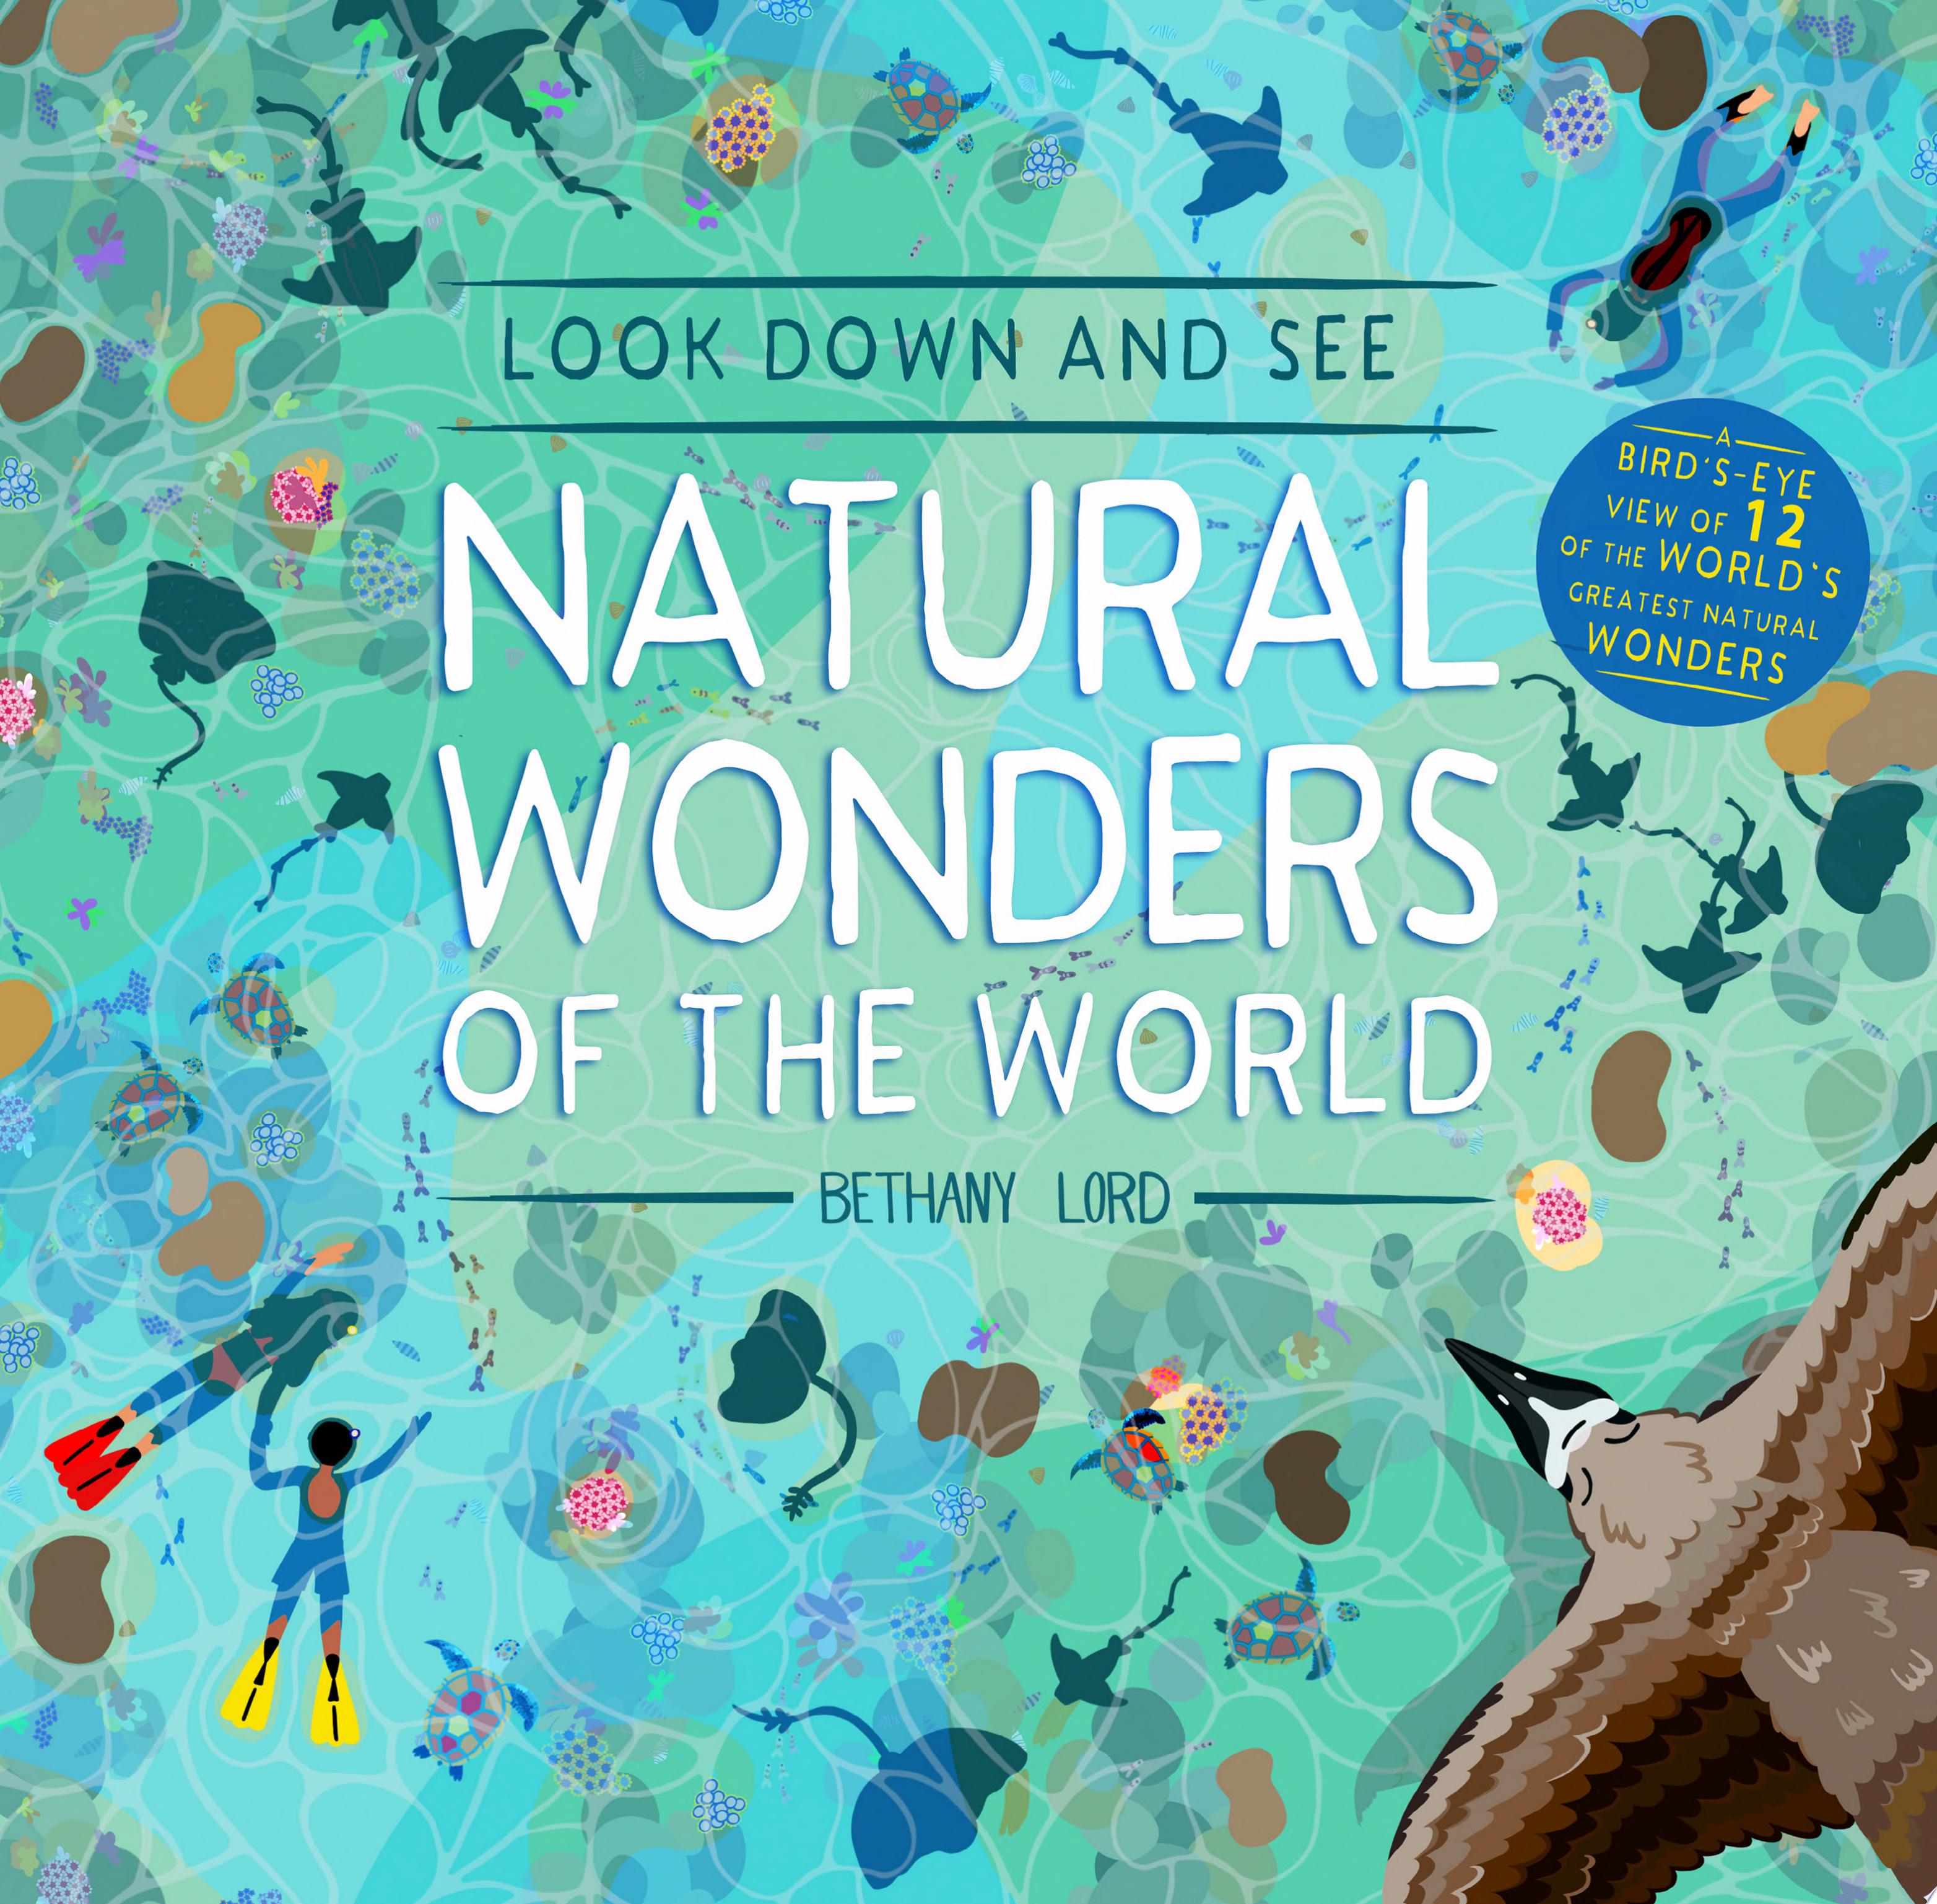 Image for "Look Down and See Natural Wonders of the World"